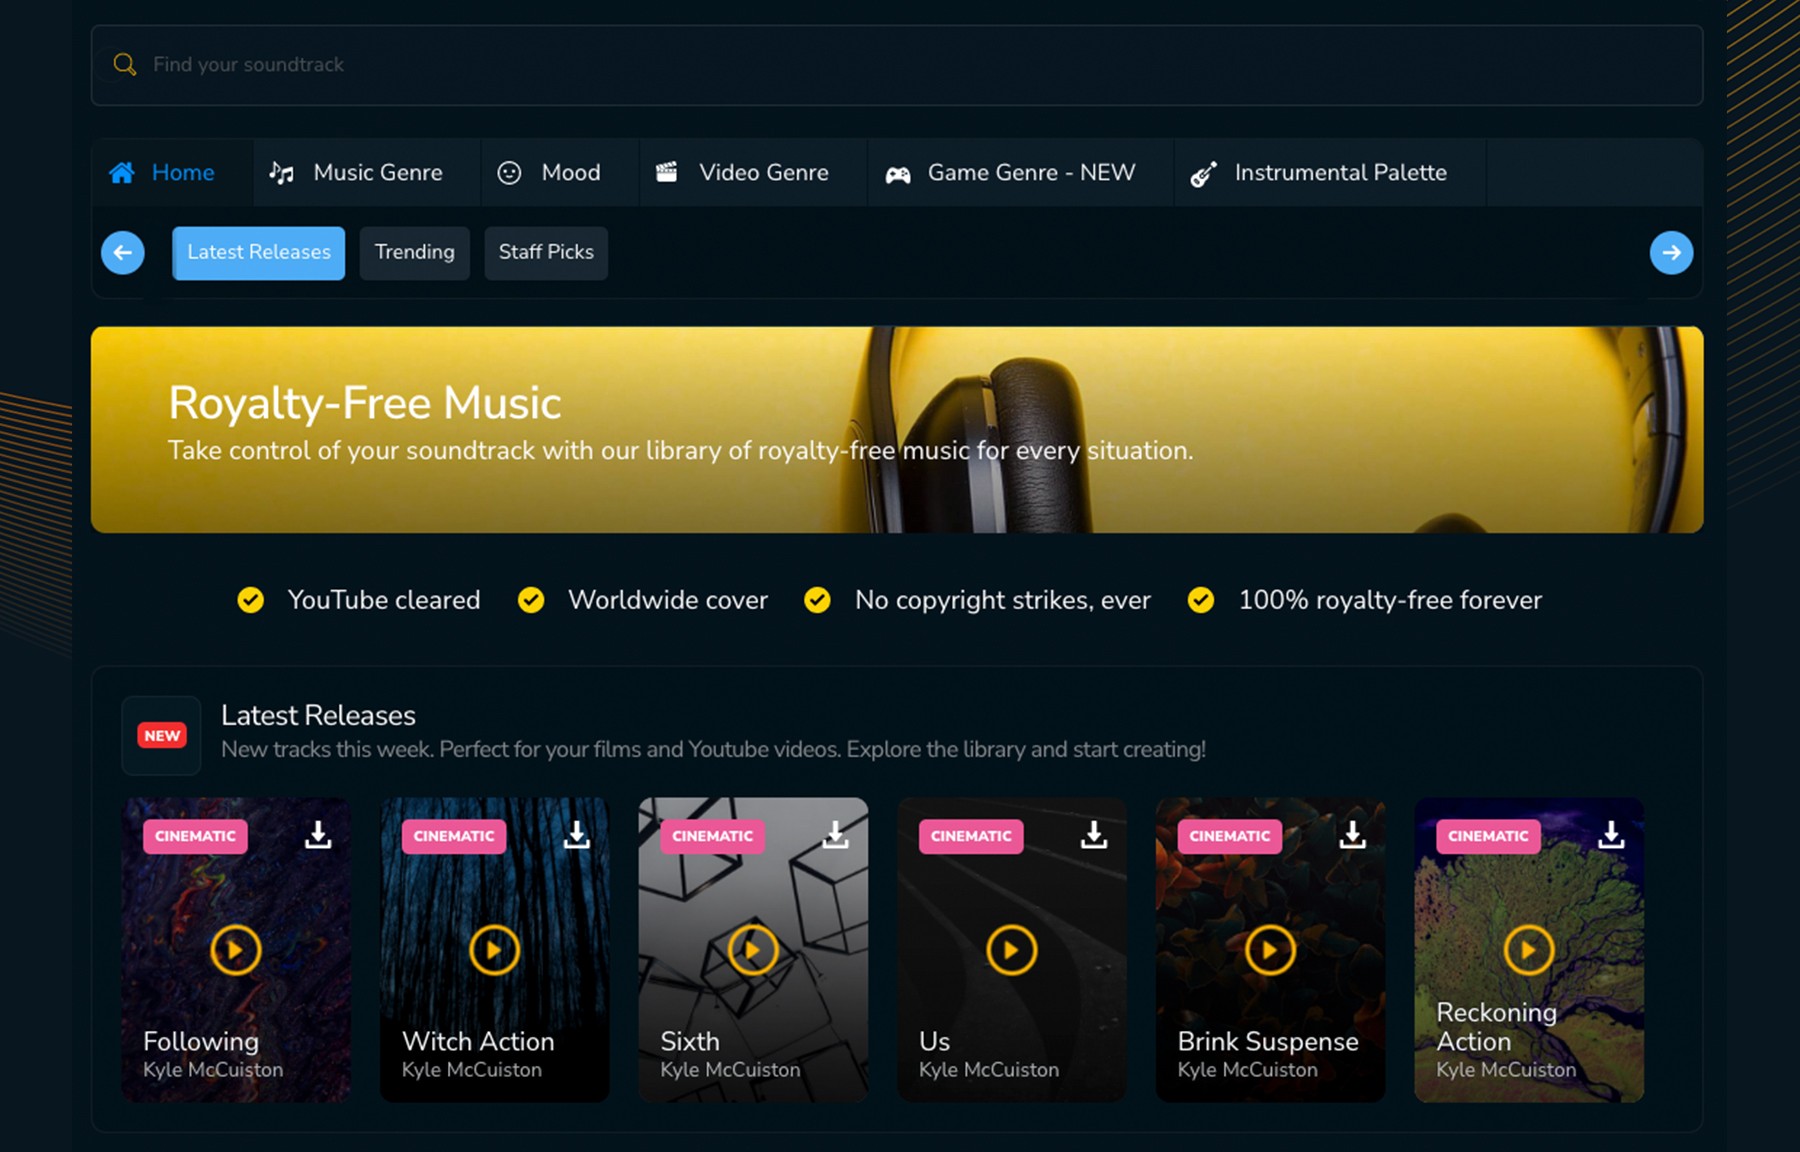 Royalty-free music library